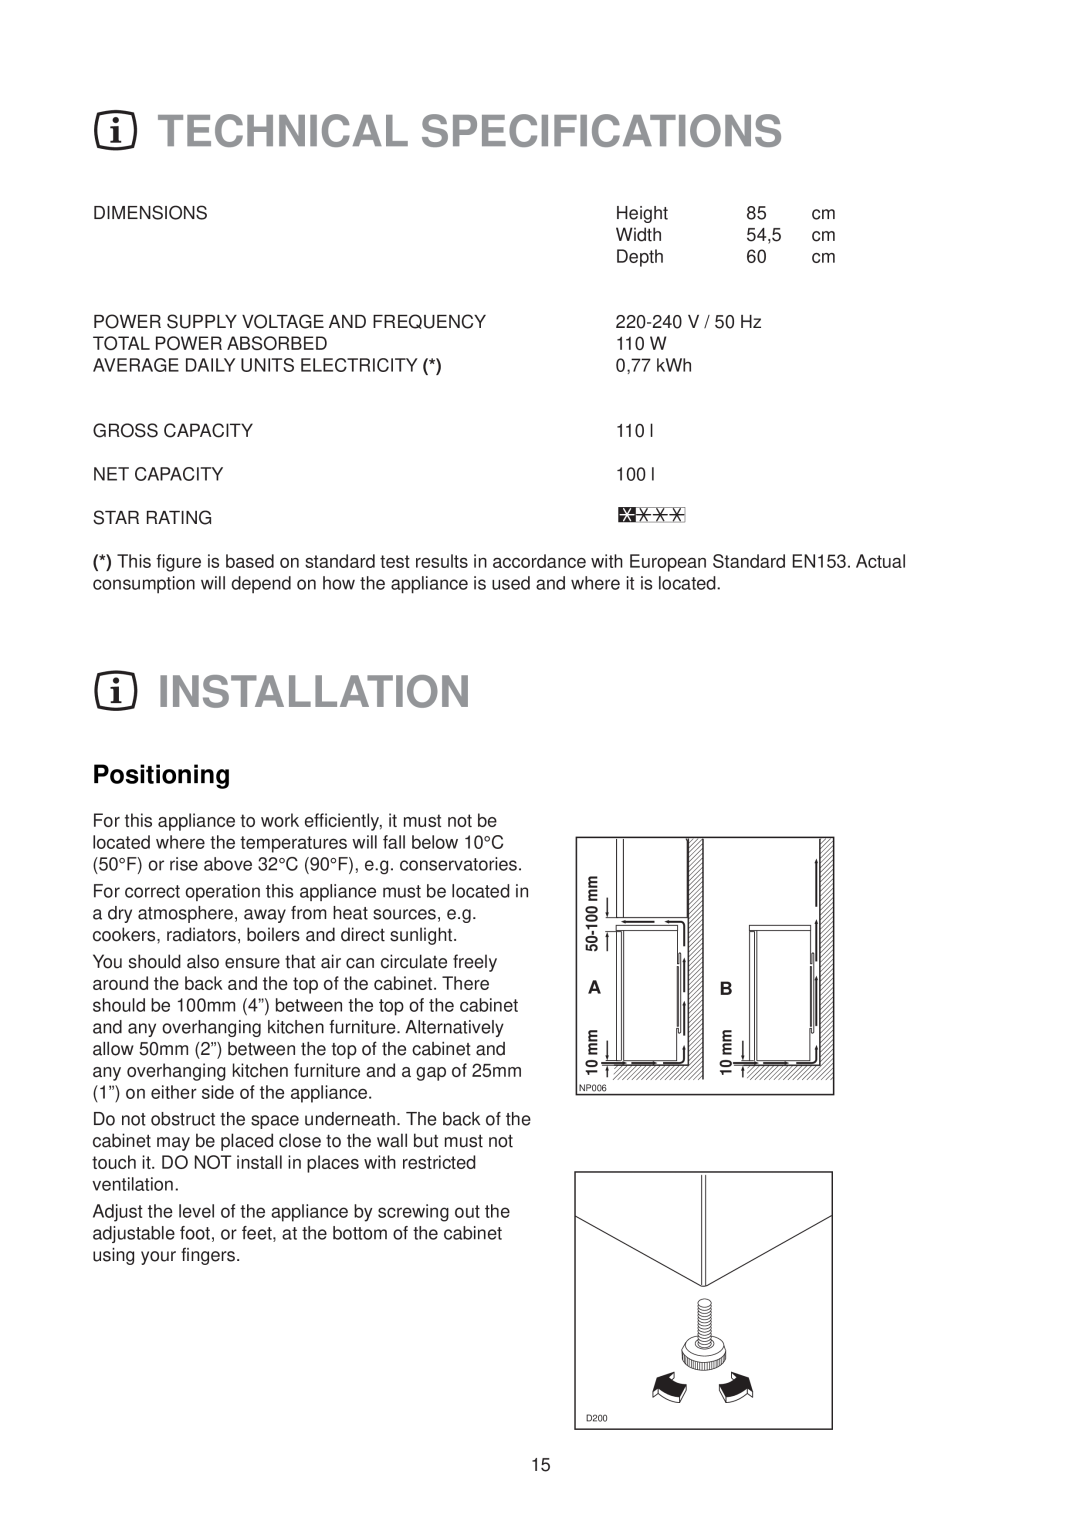 Zanussi ZVR 45 RN manual Technical Specifications, Installation, Positioning 